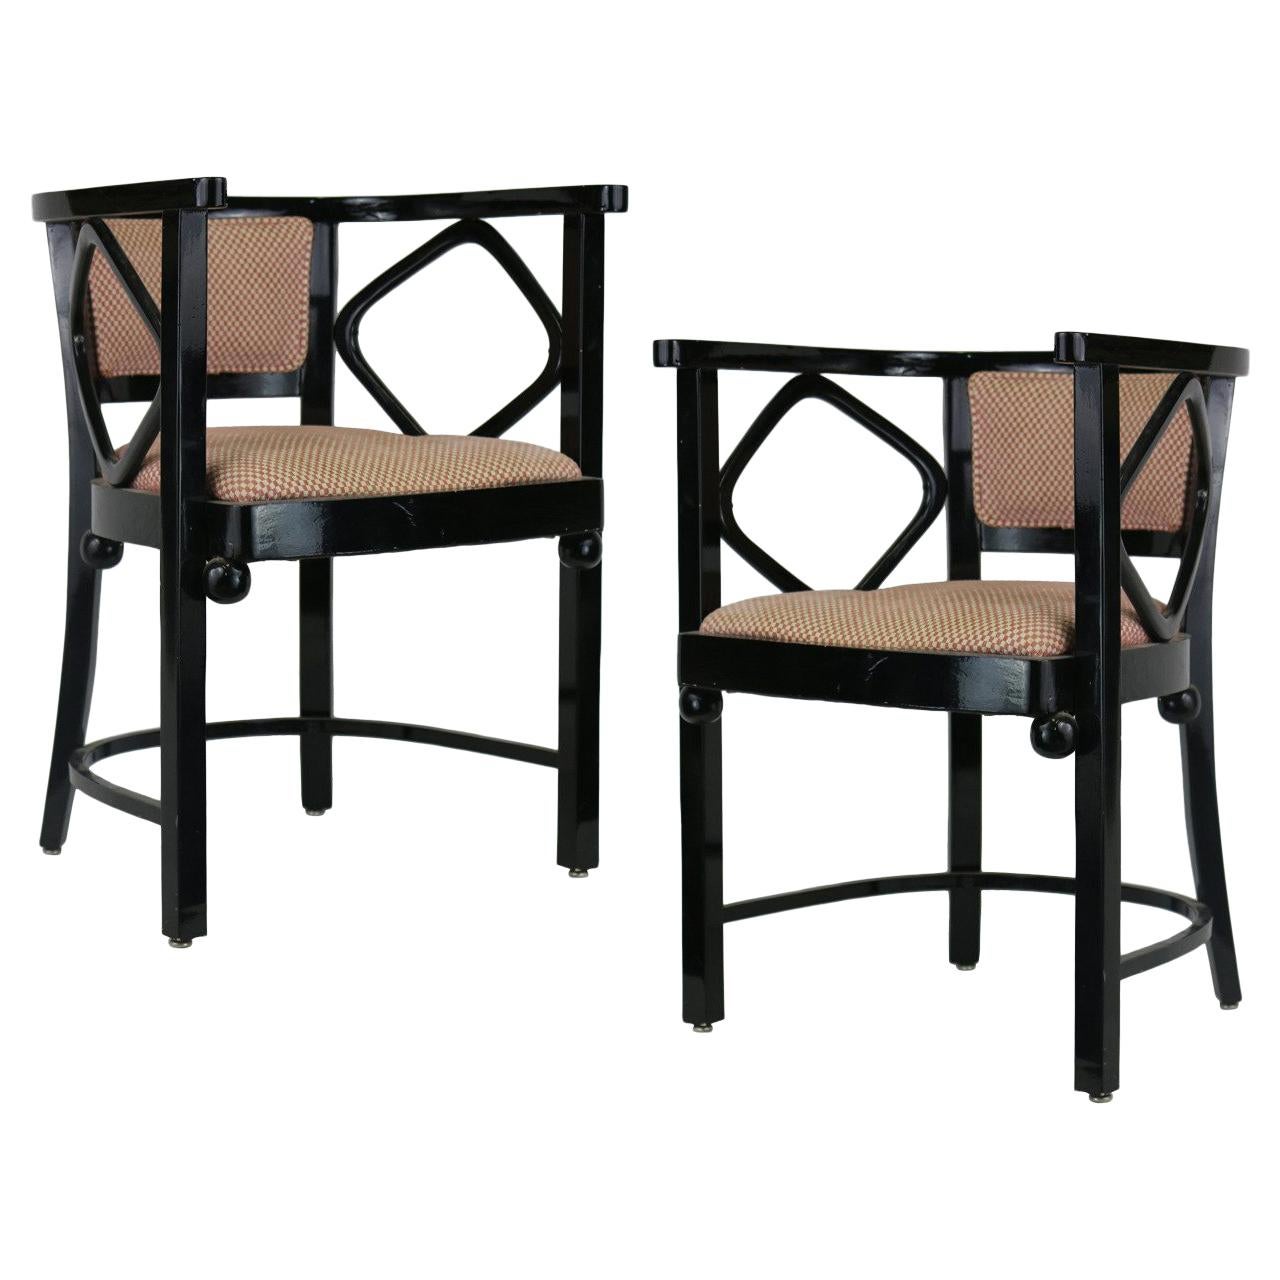 Pair of Josef Hoffmann Fledermaus Style Chairs, 1960s For Sale